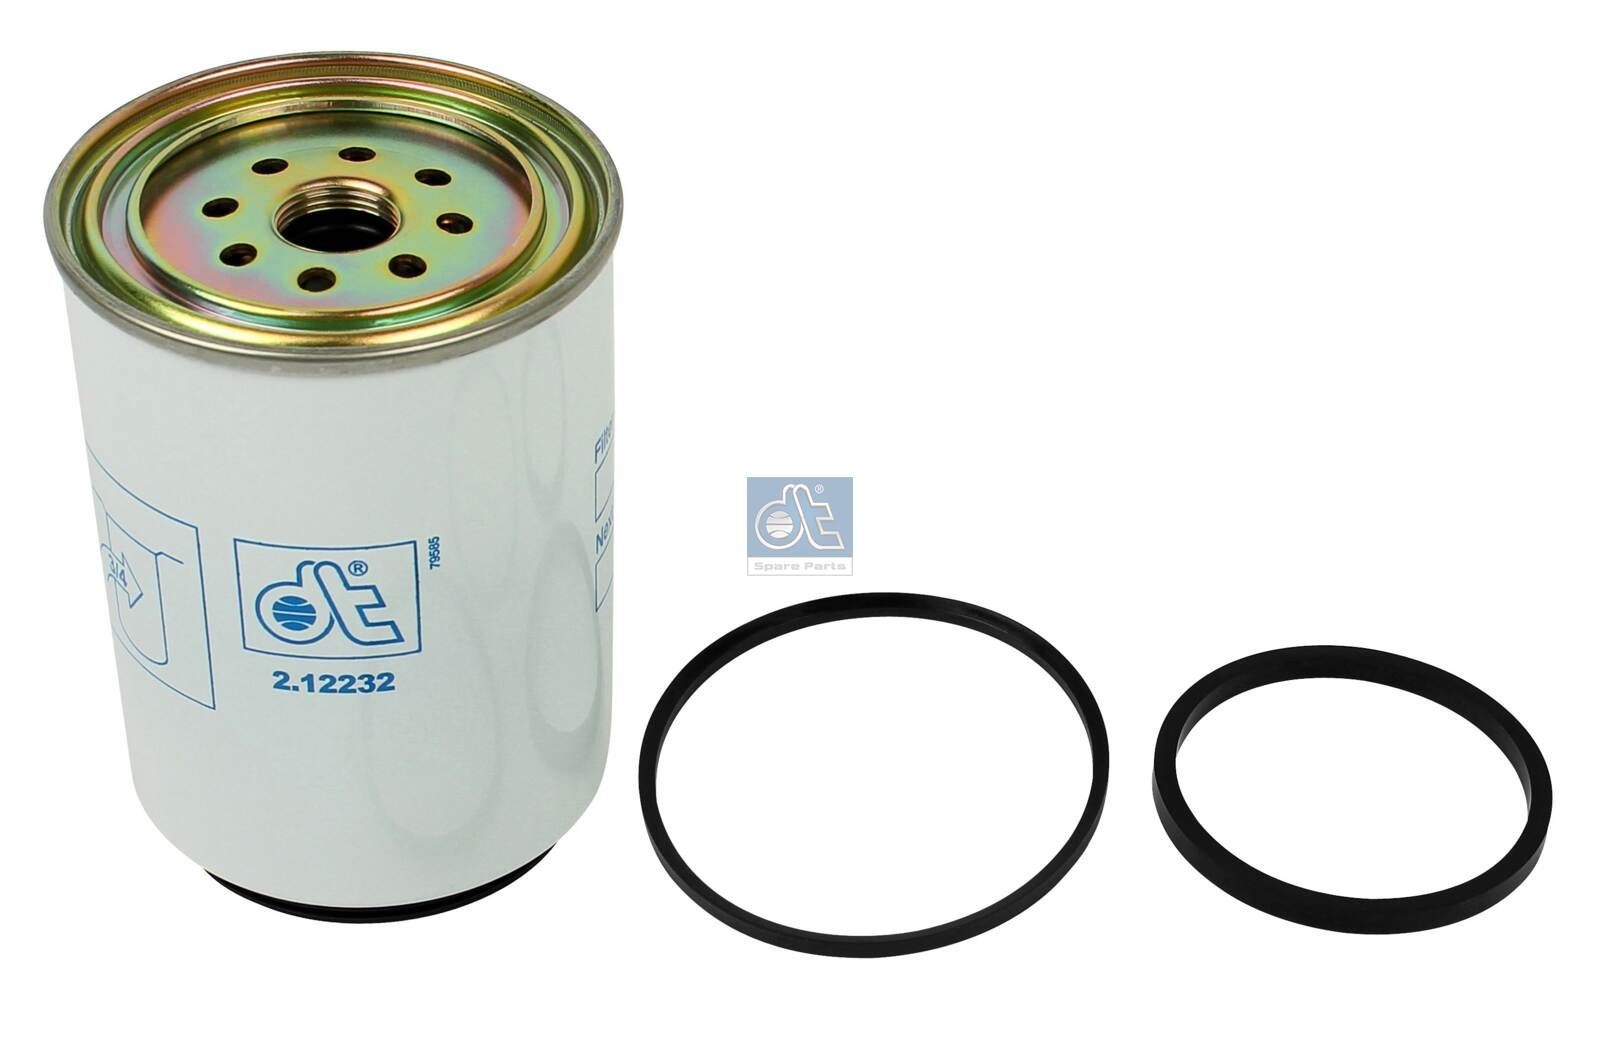 WK 1060/3 x DT Spare Parts 2.12232 Fuel filter 00 0068 711 0